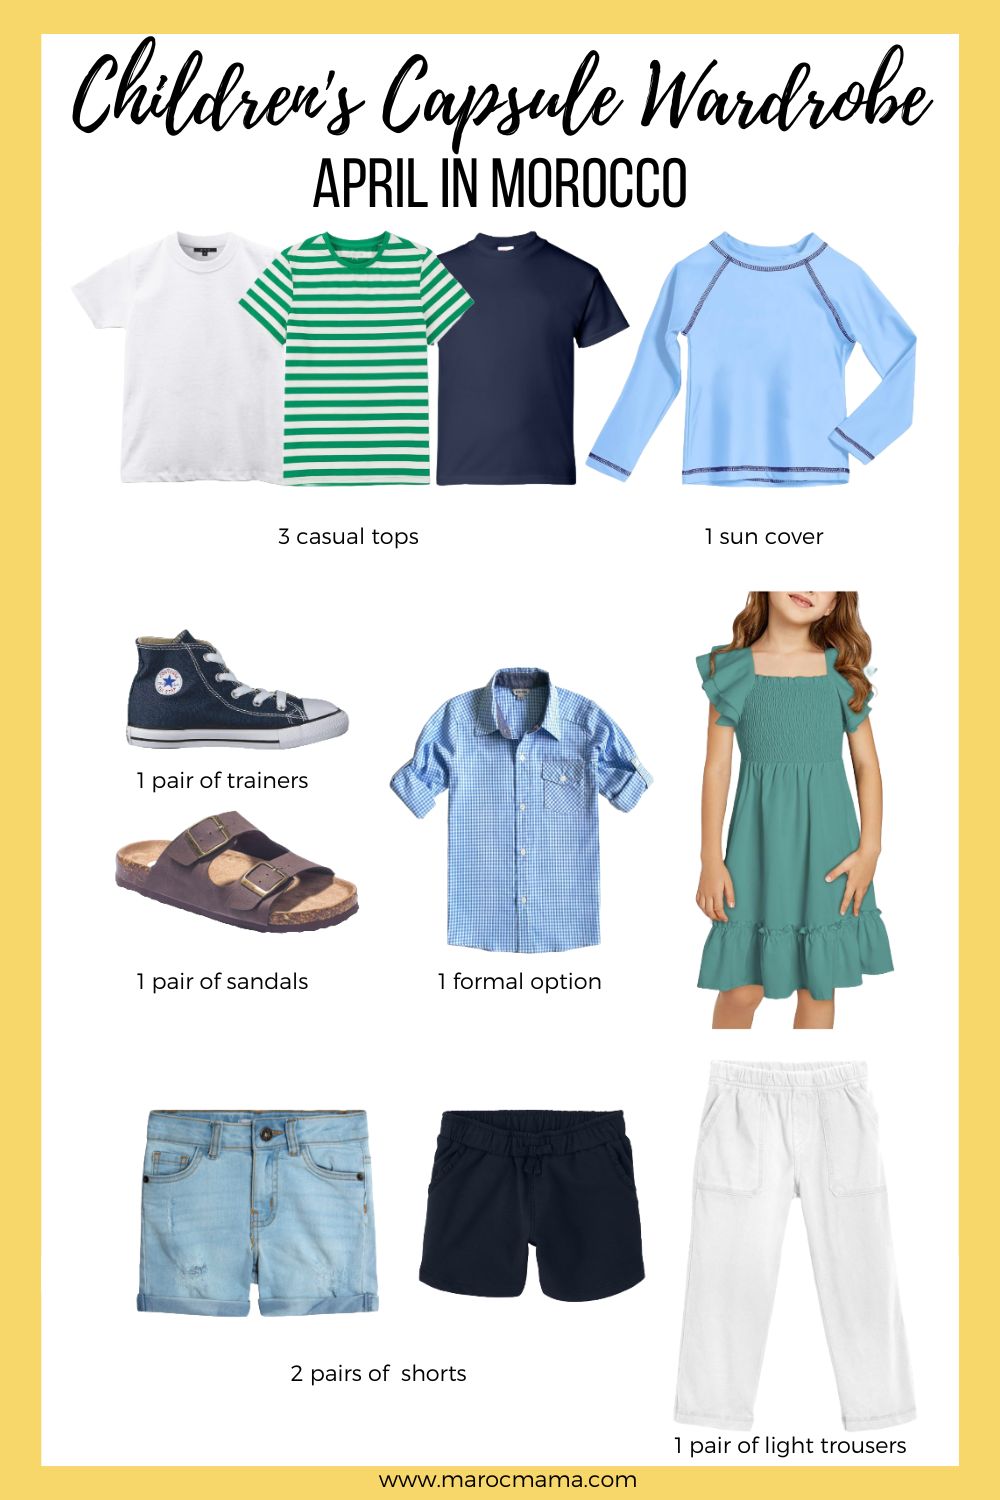 3 casual t-shirts 1 formal top 1 pair of light trousers 2 other bottoms (skirts/shorts) 1 linen shirt/sun cover to shade you from the sun 1 pair of trainers 1 pair of sandals with the text Children's Capsule Wardrobe, April in Morocco